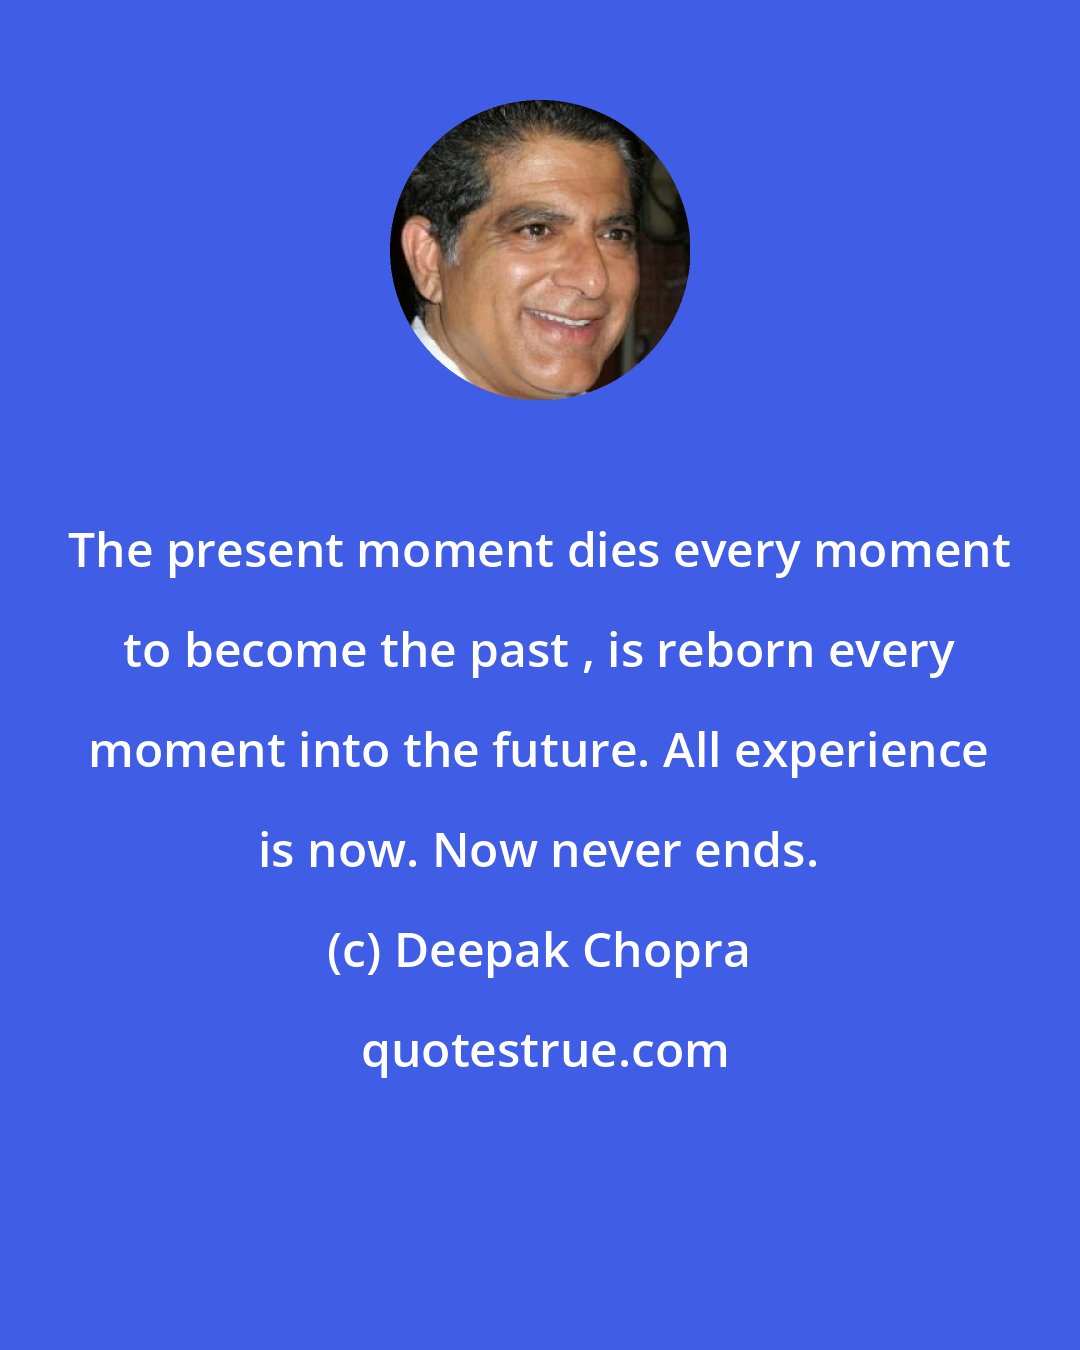 Deepak Chopra: The present moment dies every moment to become the past , is reborn every moment into the future. All experience is now. Now never ends.